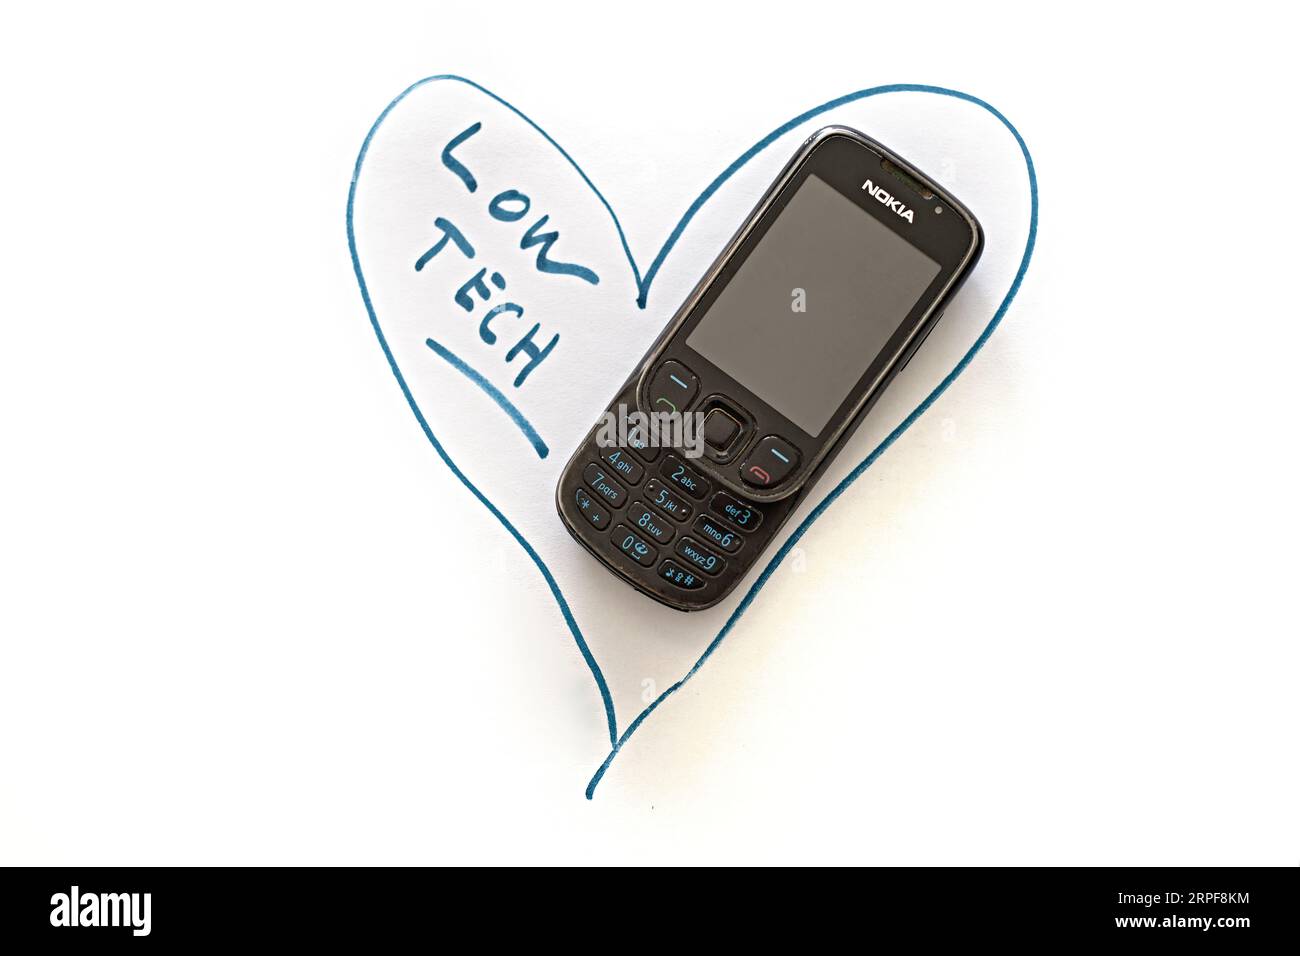 Used cell phone Nokia 6303 ci in a green heart, white background. Concept of loving sustainable, durable, efficient, simple, and maintainable low-tech. Stock Photo